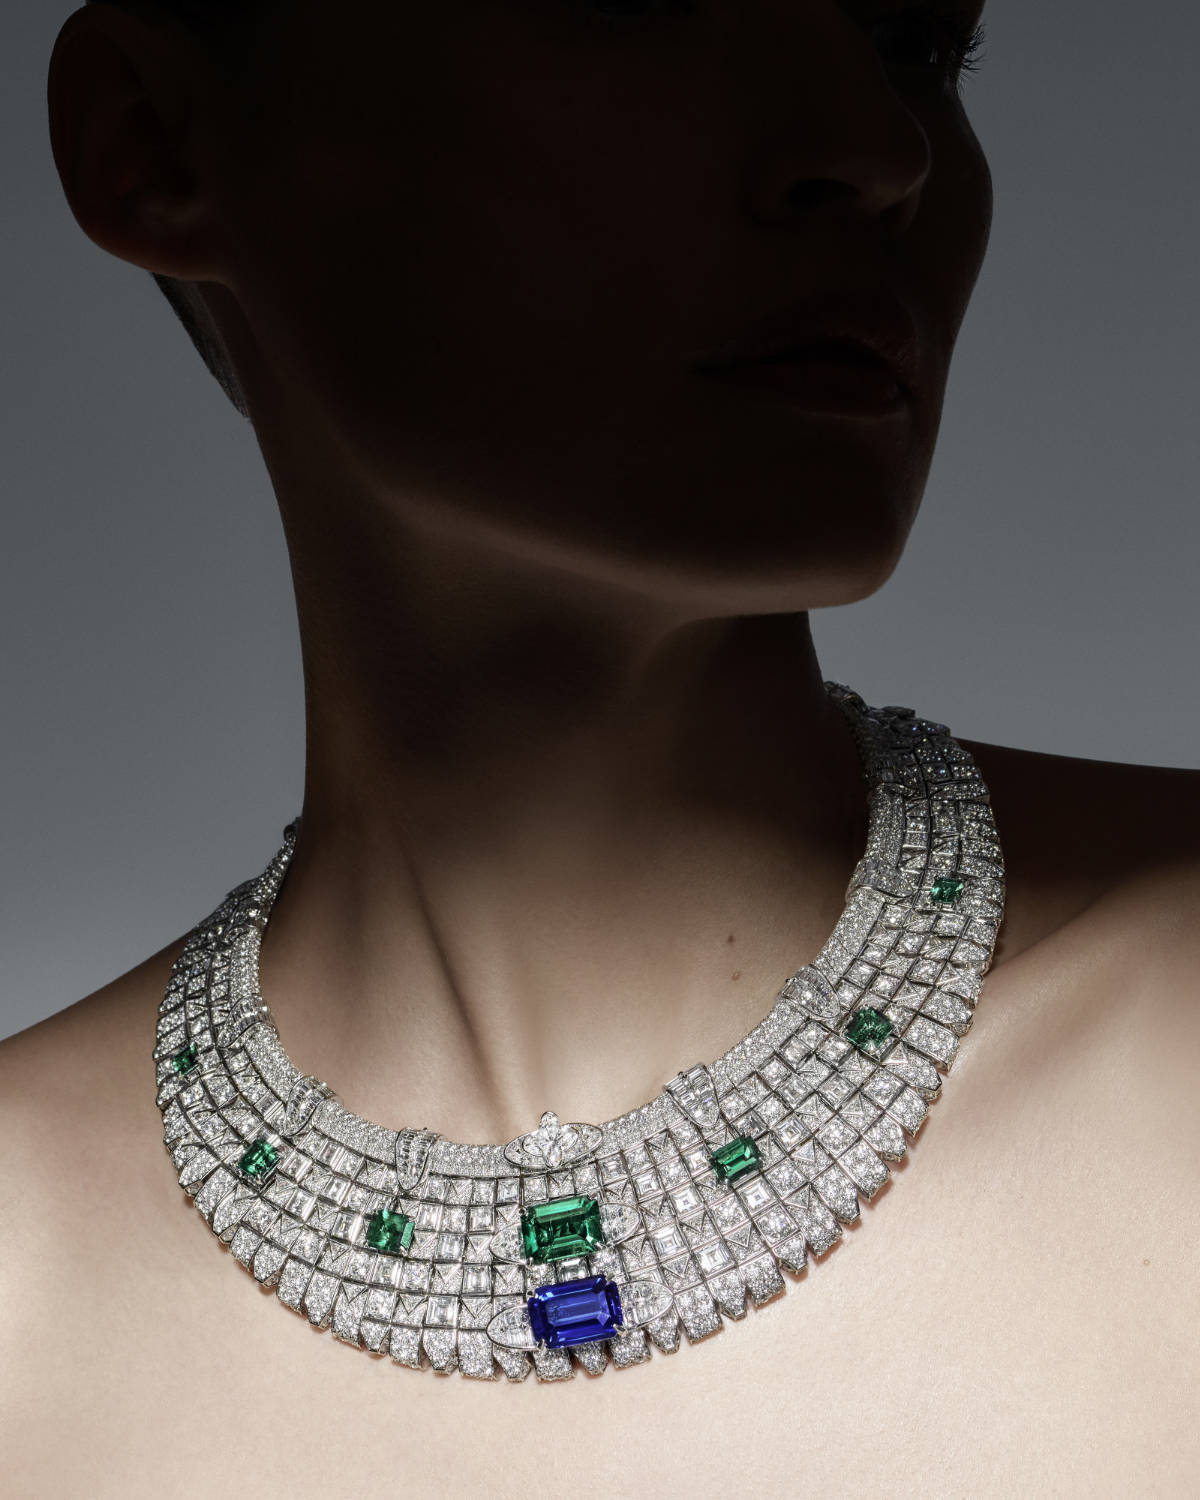 Louis Vuitton Presents Its New 2022 High Jewellery Collection: Spirit